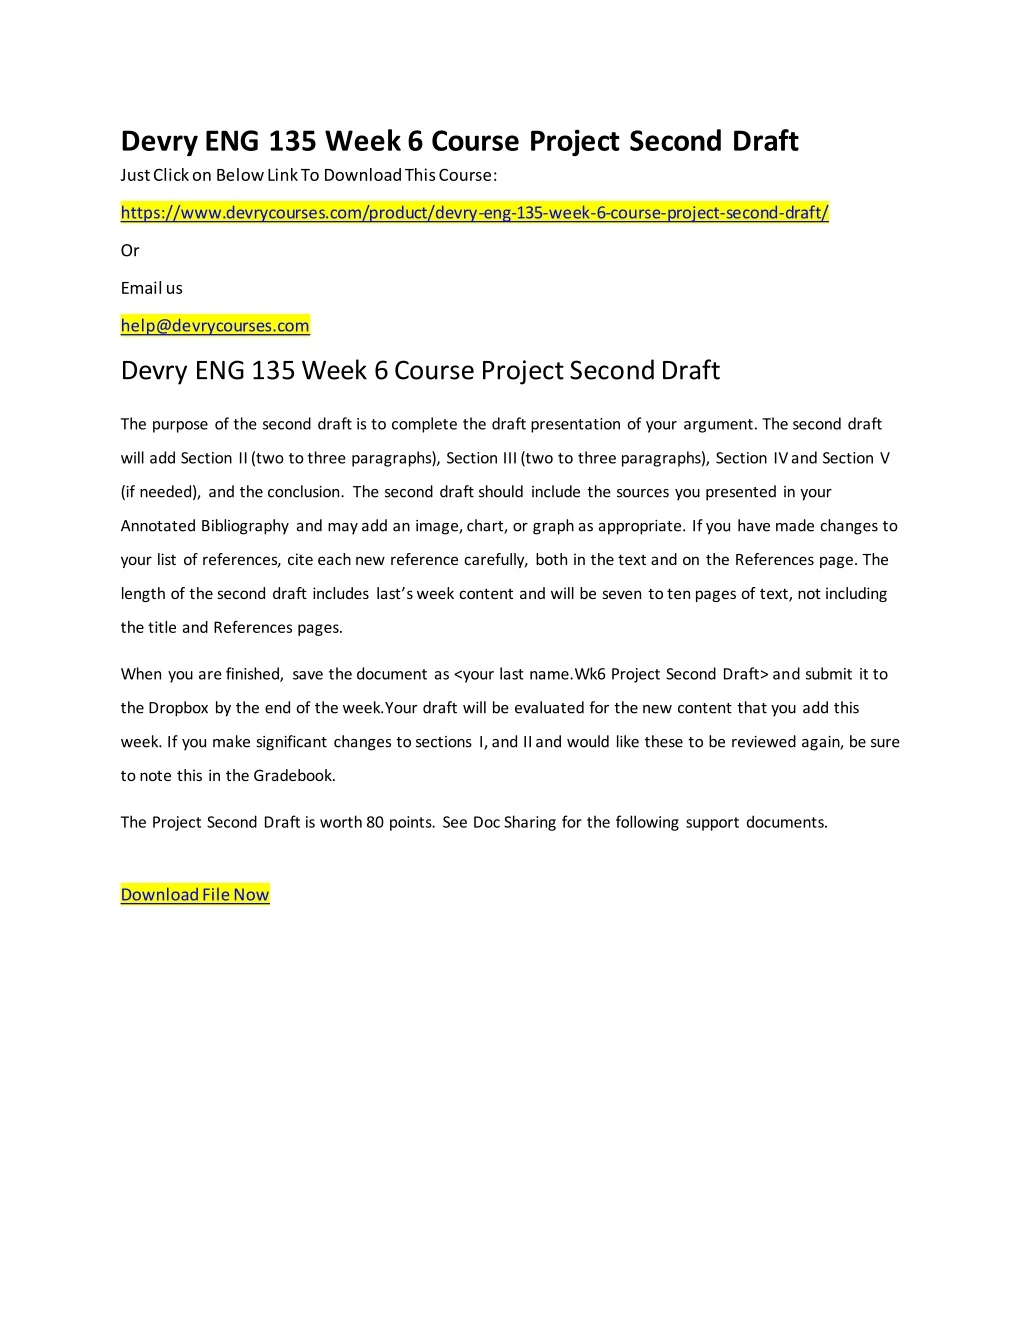 devry eng 135 week 6 course project second draft